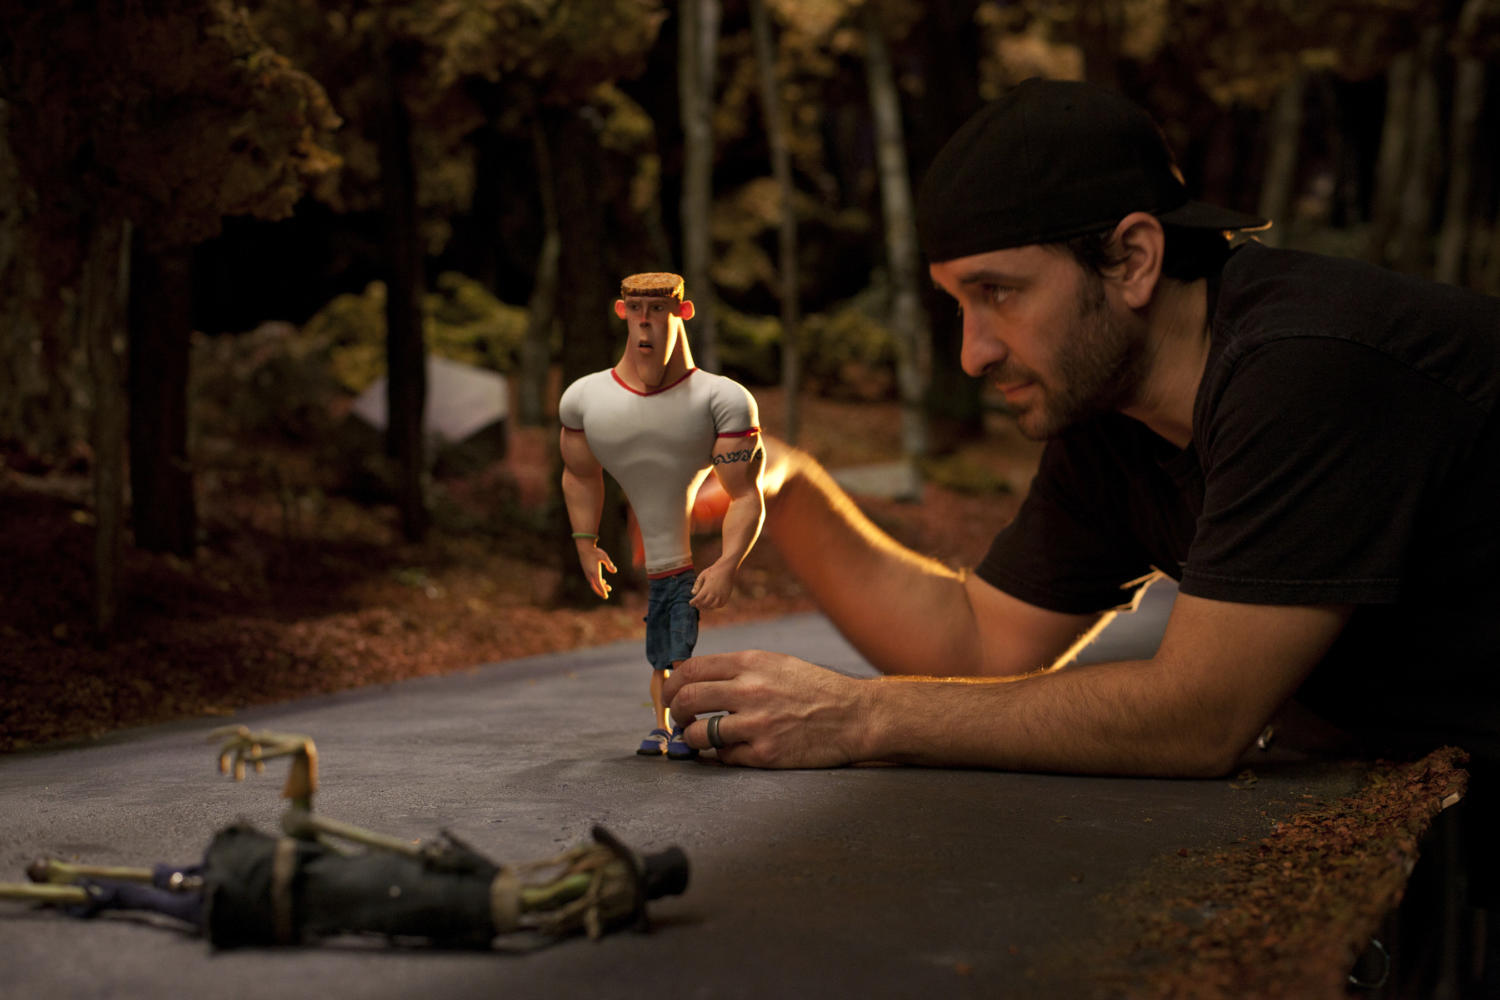 Schiff positions a character from Paranorman. It was released in 2012 by Laika.